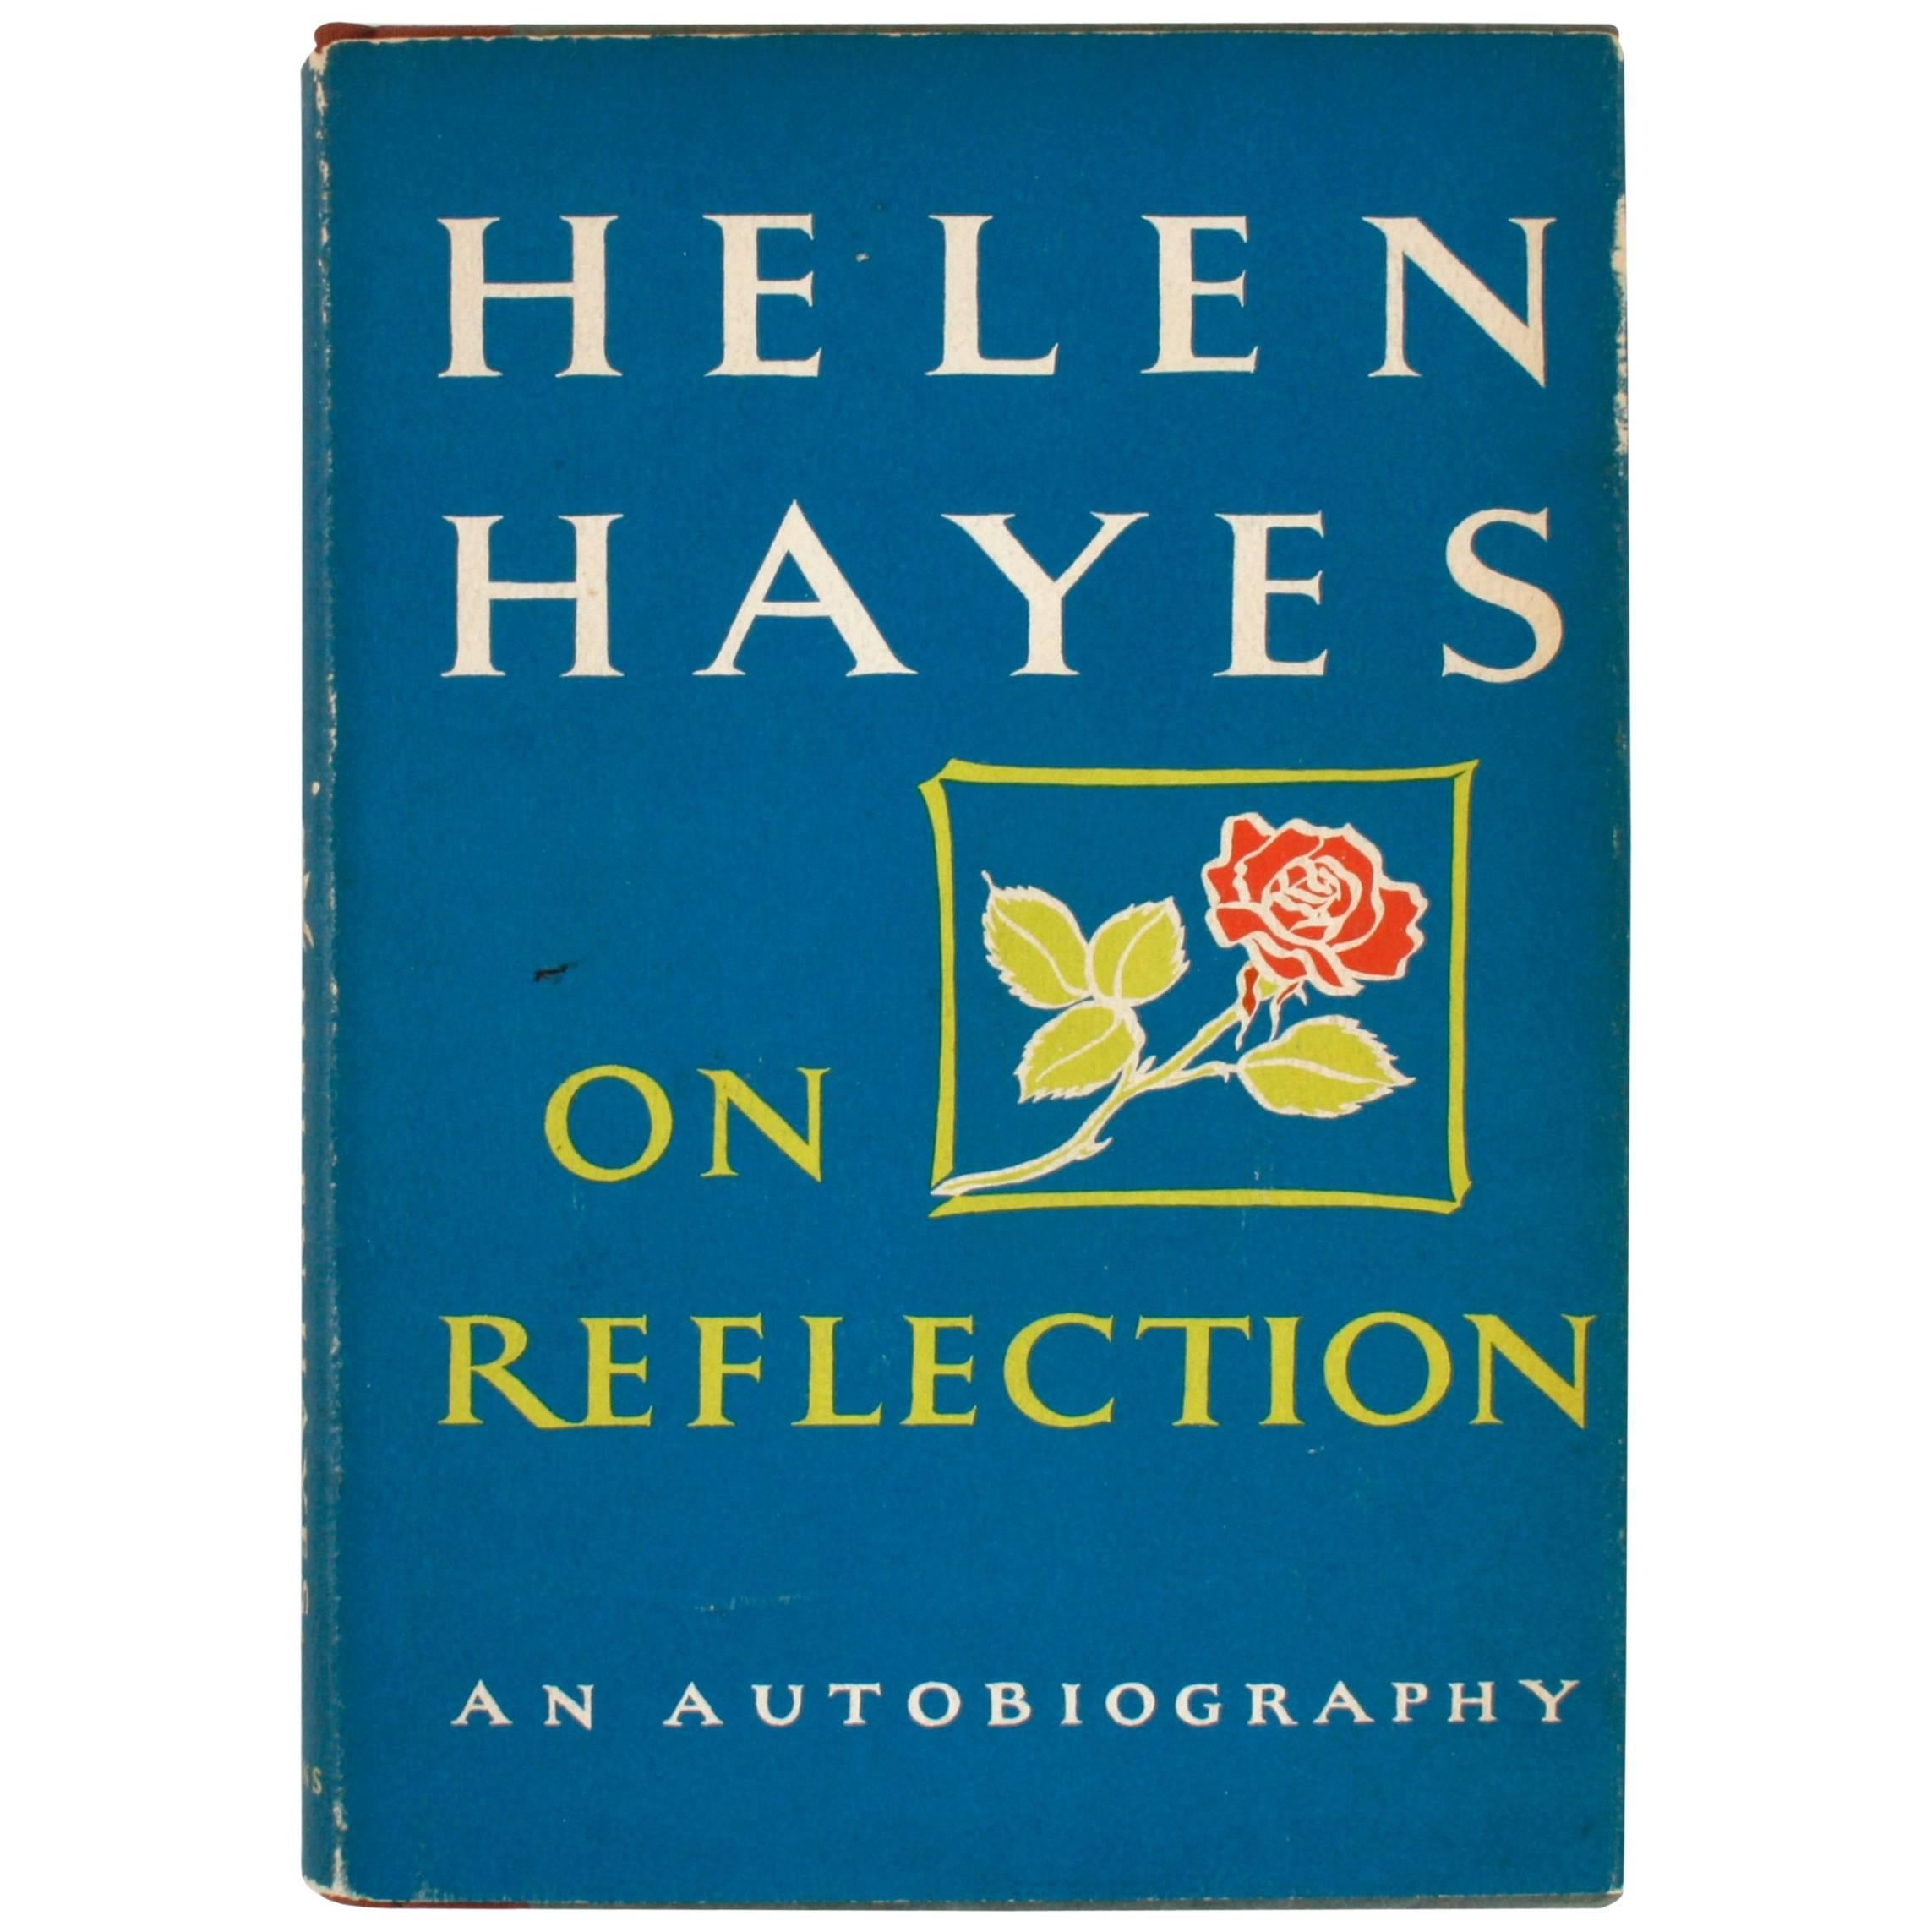 "Helen Hayes On Reflection An Autobiography", Signé 